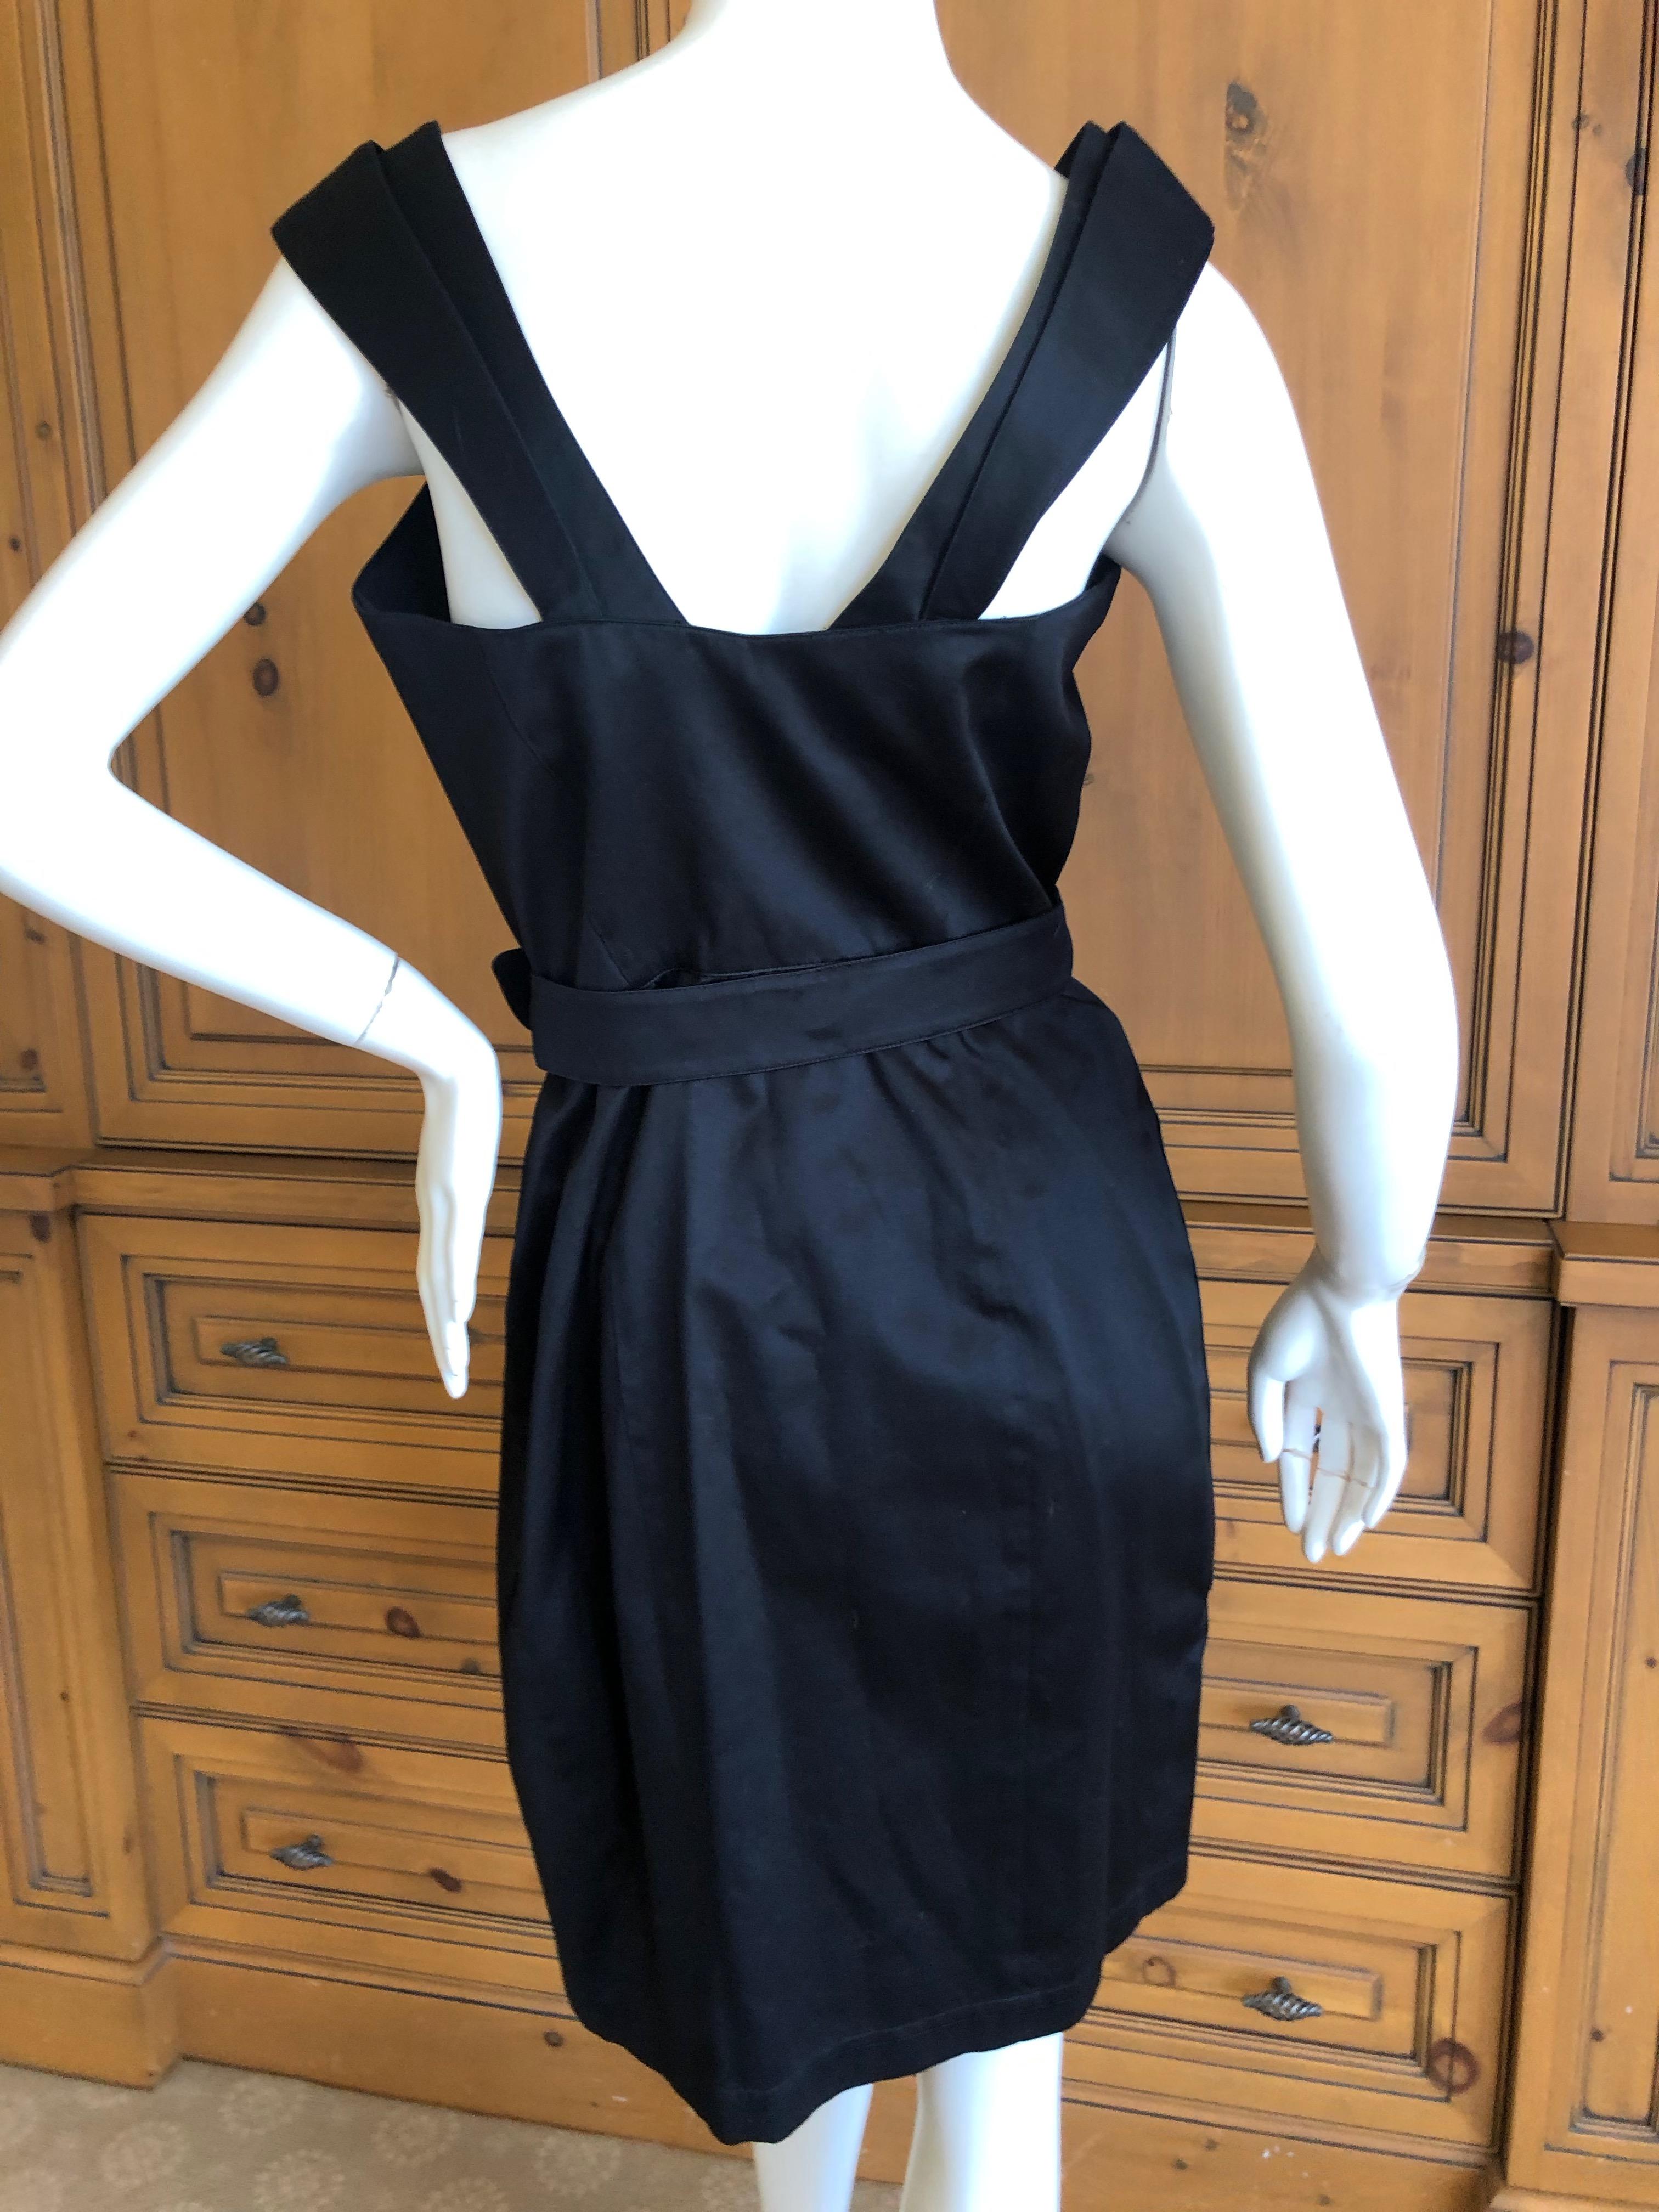 Thierry Mugler Vintage 1980's Little Black Dress with Mod Belt
Cotton
Snaps closed inside
Classic Mugler
Marked size 40  please check measurements
Bust 36